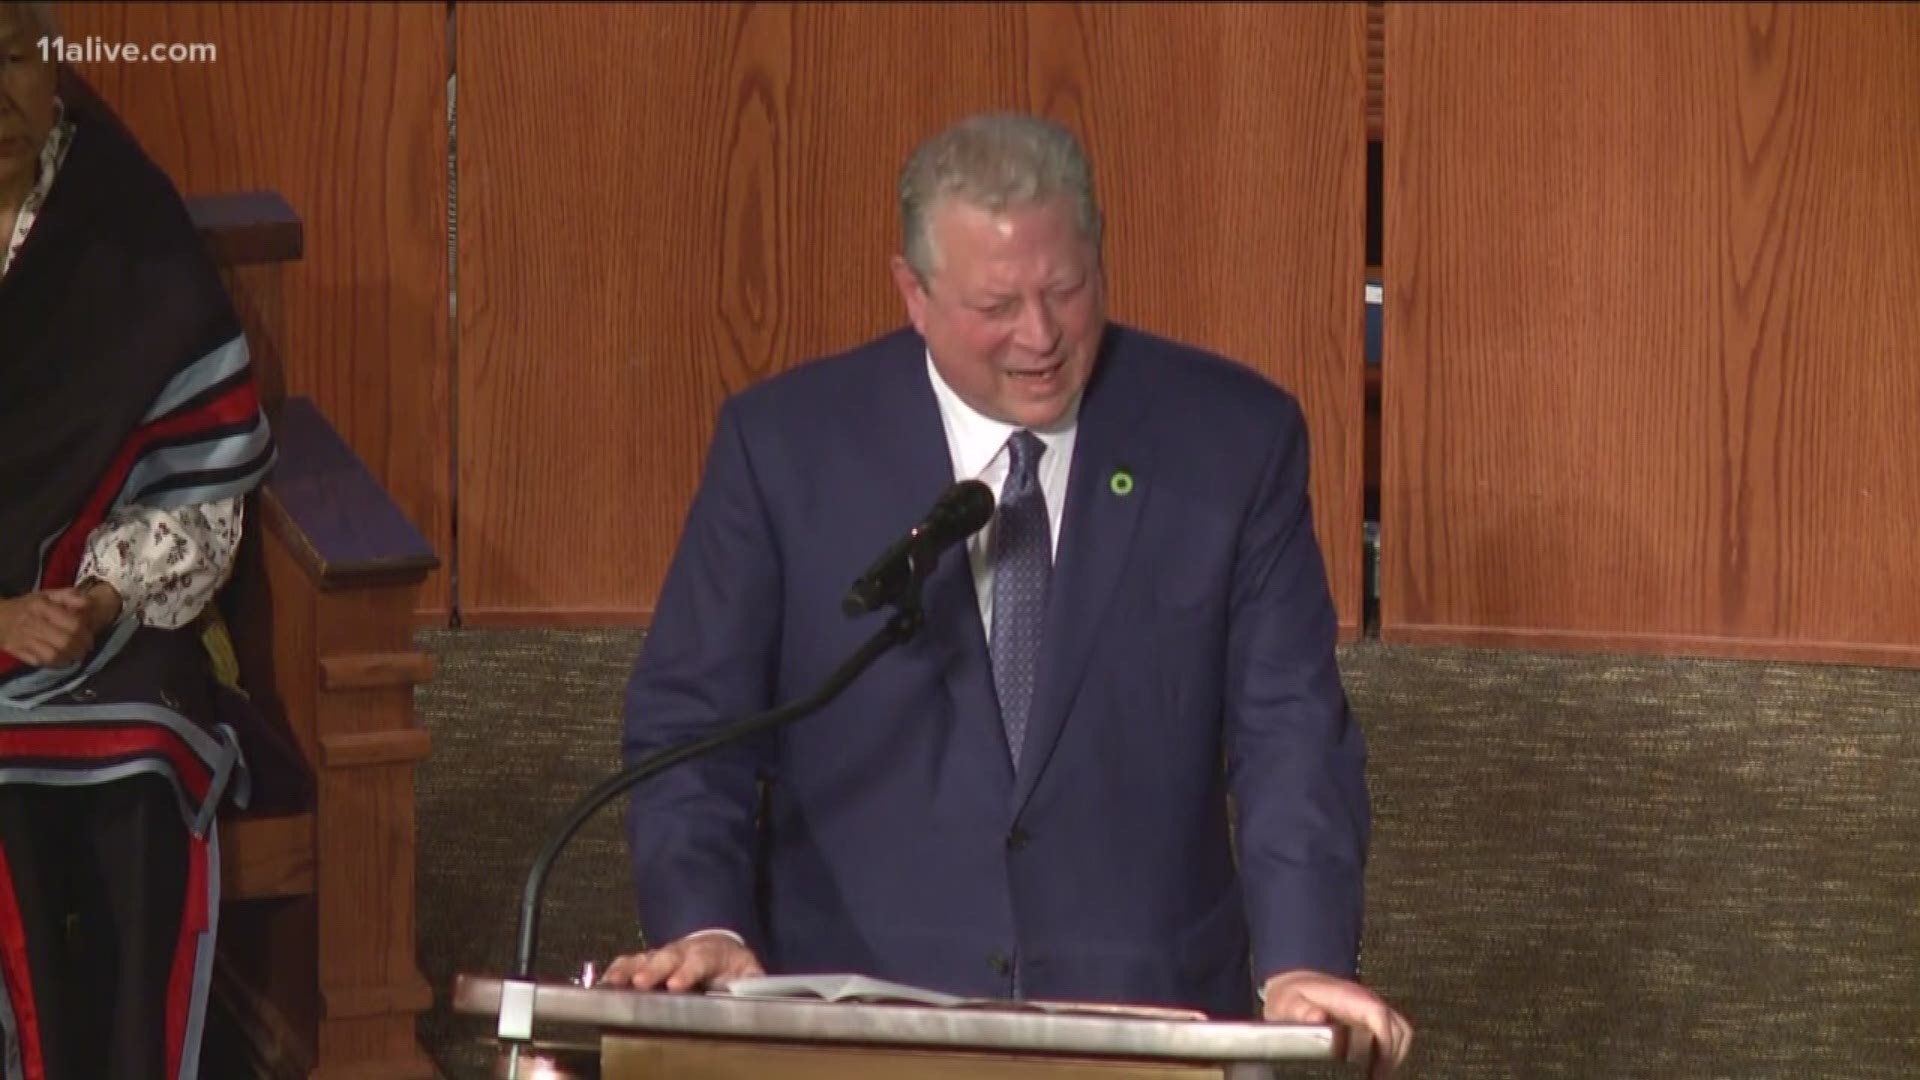 Faith leaders at Ebenezer Baptist Church are partnering with former Vice President Al Gore to take on climate change.